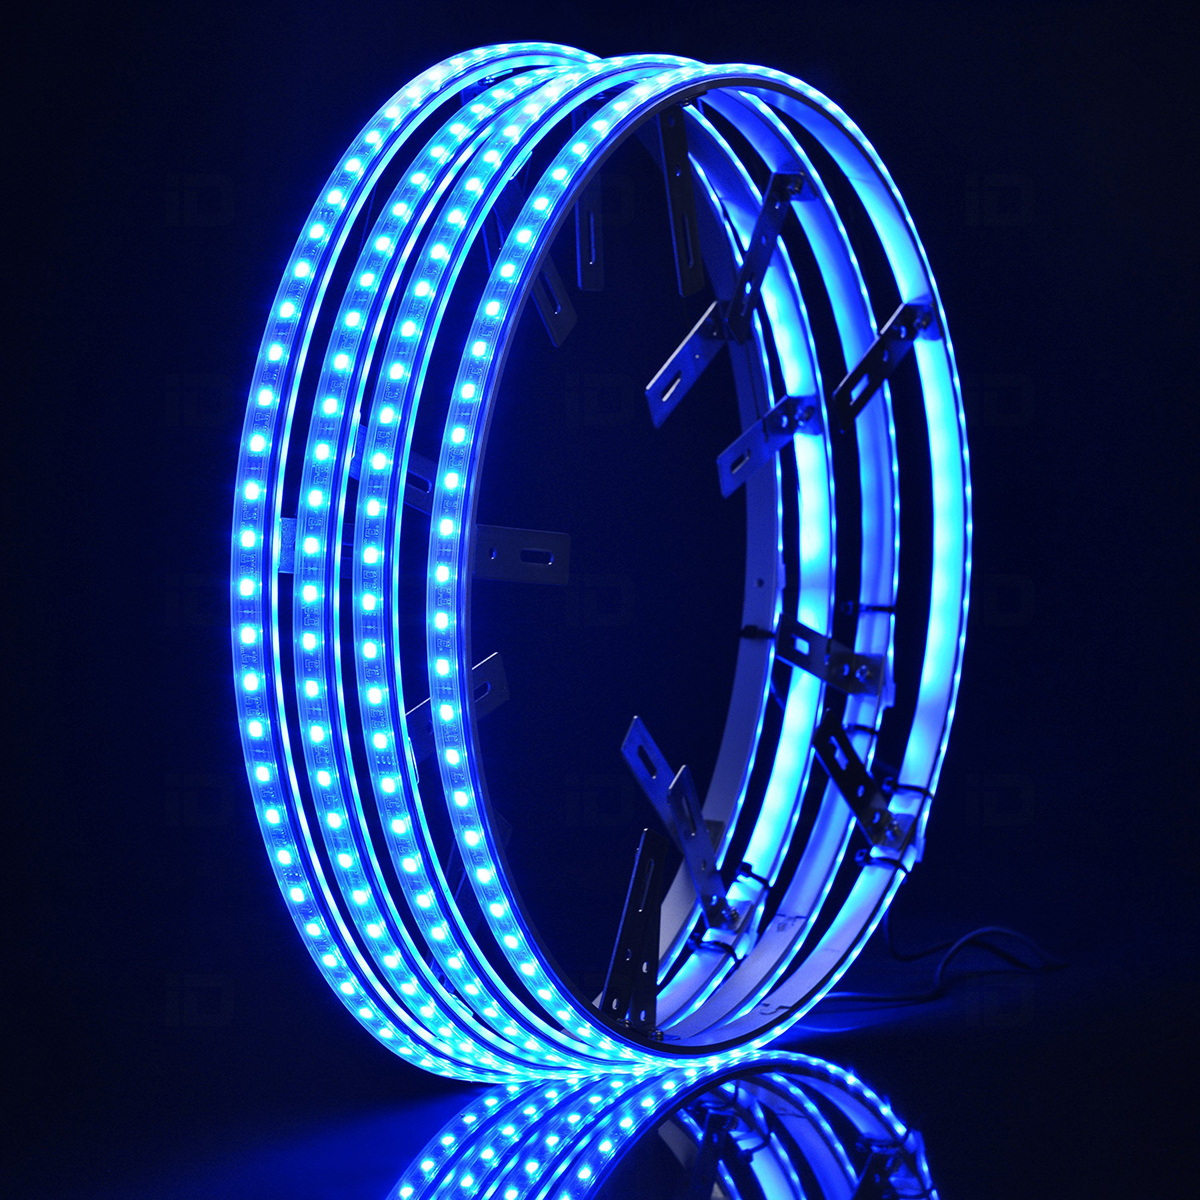 COLORSMART BLUETOOTH CONTROLLED 17INCH LED WHEEL LIGHT DOUBLE SIDE STRIPS